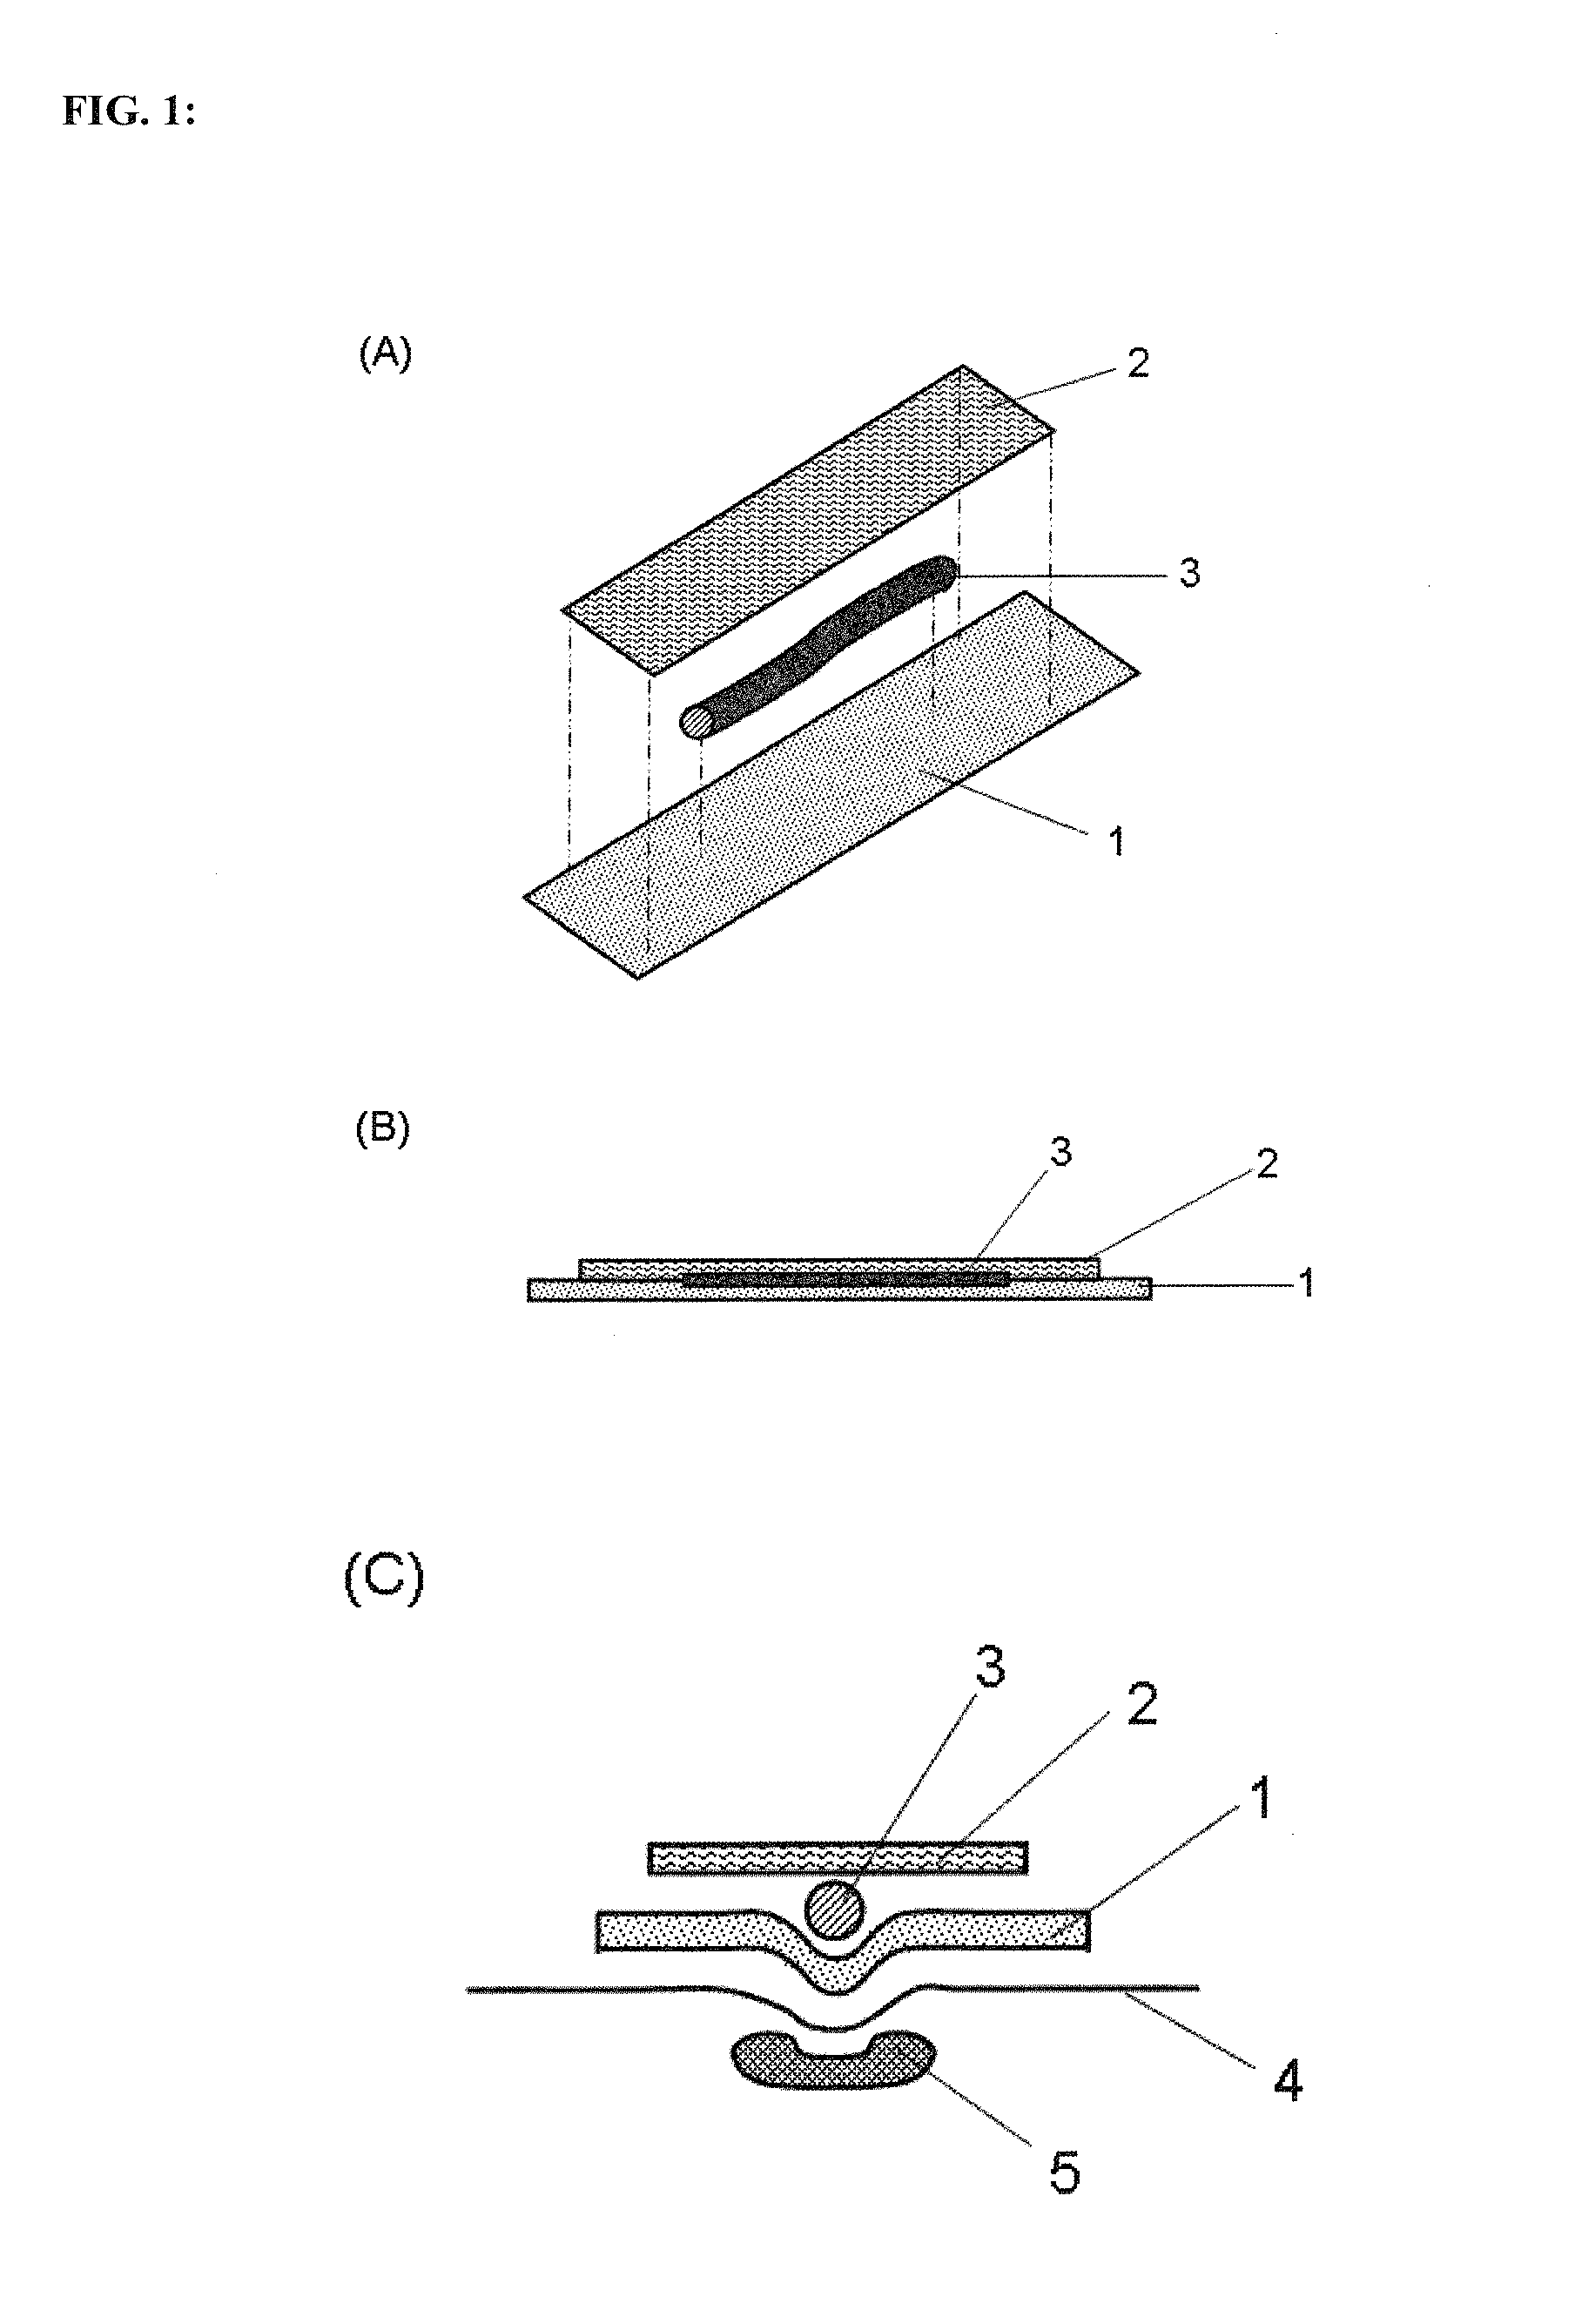 Adhesive patch or bandage for use in treating blood vessel diseases